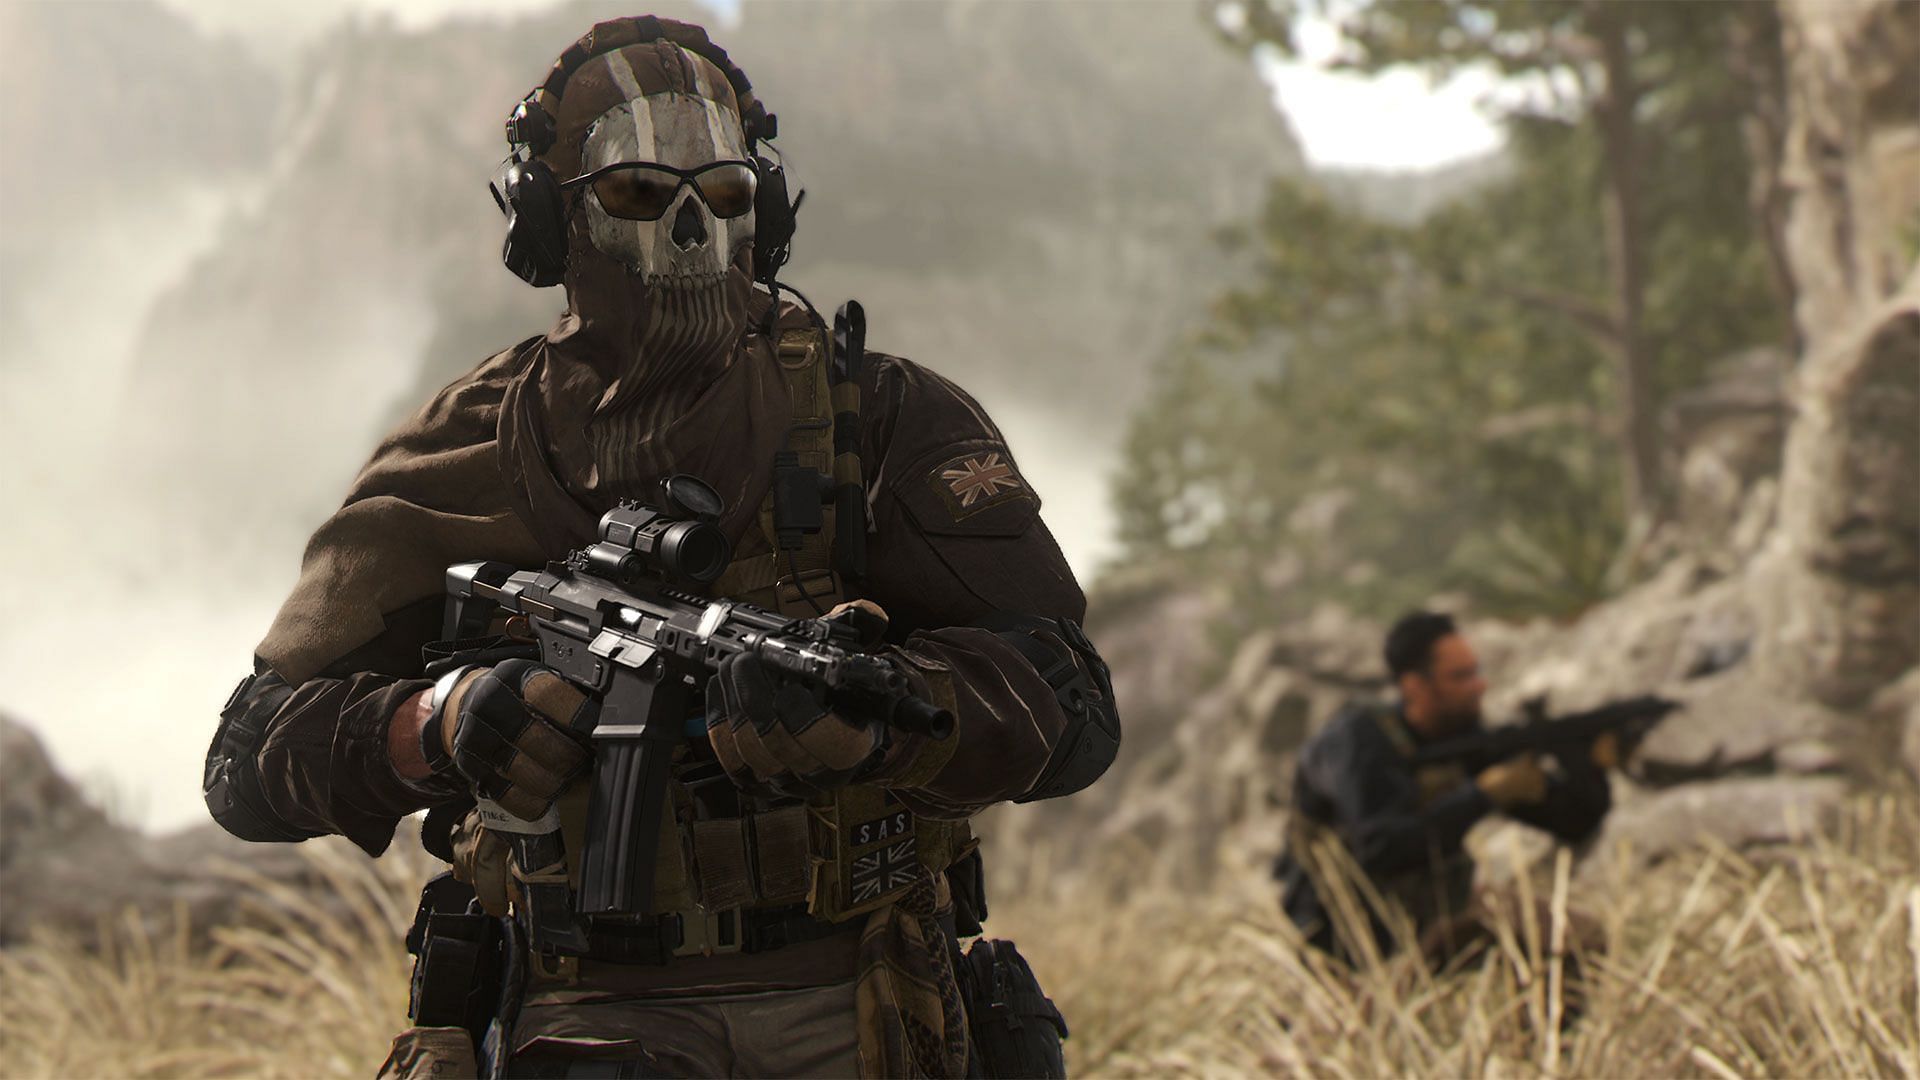 The latest CoD Modern Warfare 2 trailer is here (Image via Activision)